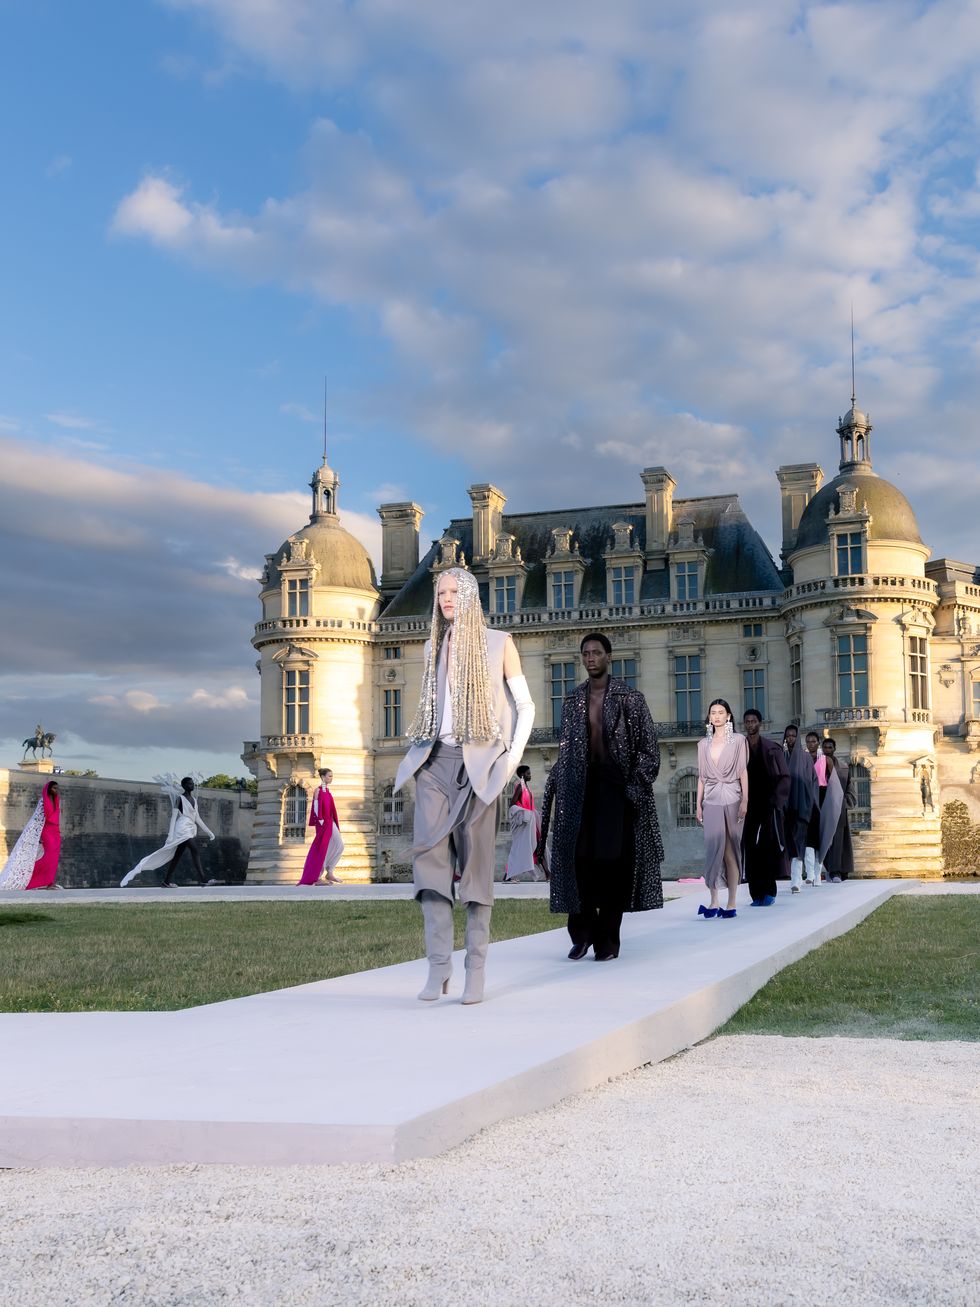 ambiance at the valentino fall 2023 couture collection runway show at the chateau de chantilly on july 5, 2023 in paris, france photo by francois goizewwd via getty images